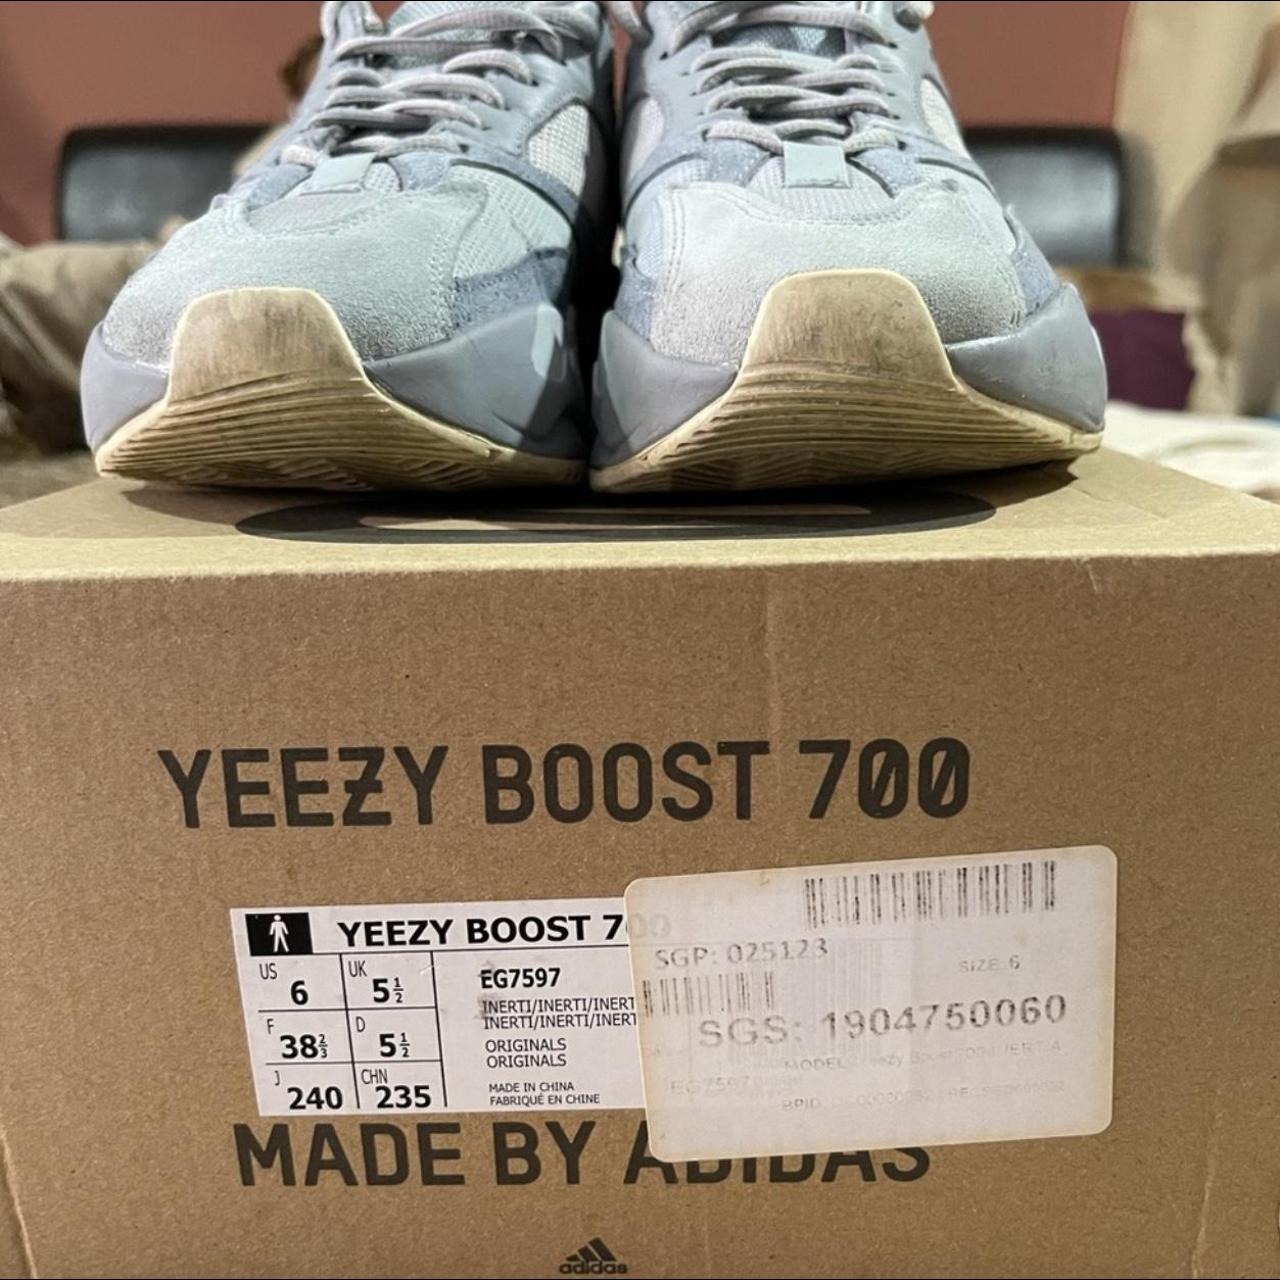 Yeezy boost 700 in great condition! Size 6 - Depop